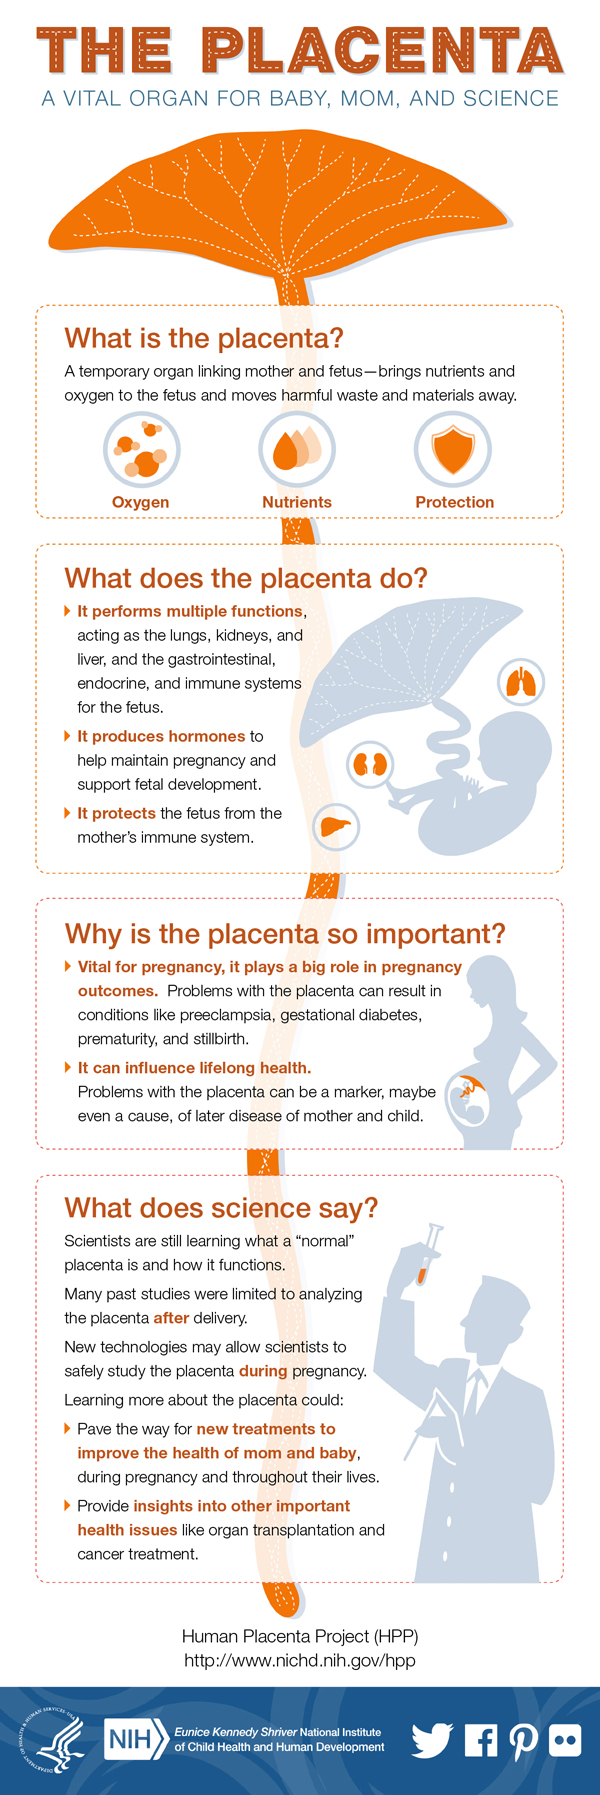 The Placenta infographic